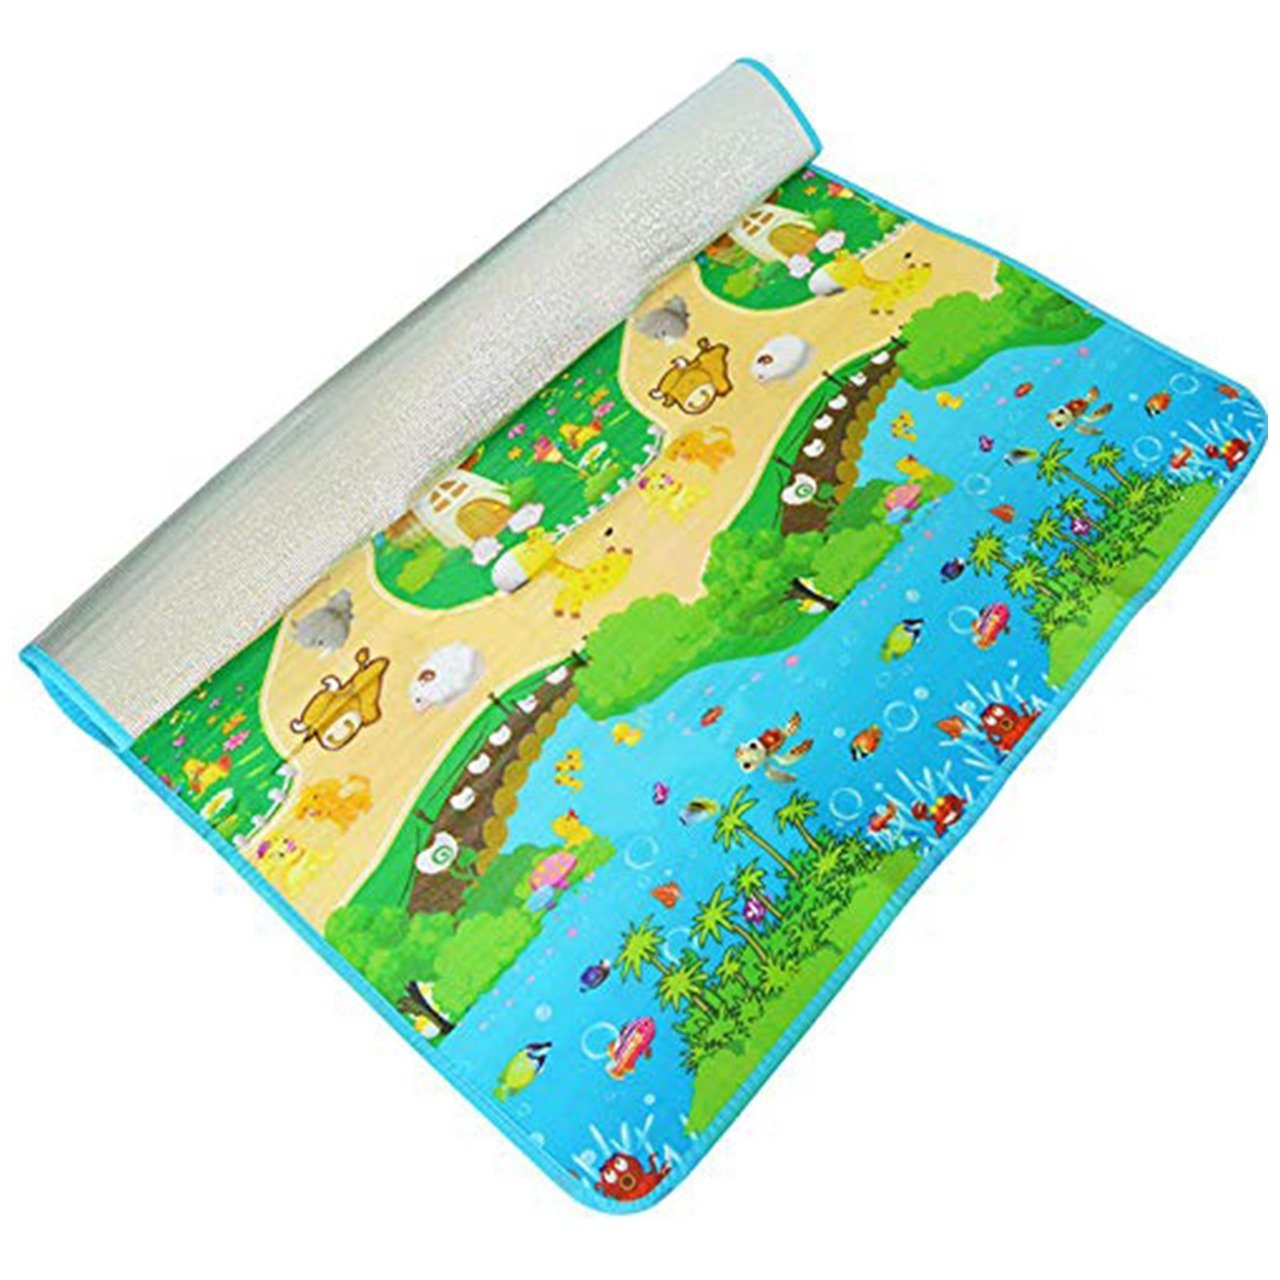 1200 Waterproof Single Side Baby Play Crawl Floor Mat for Kids Picnic School Home (Size 180 x 115)